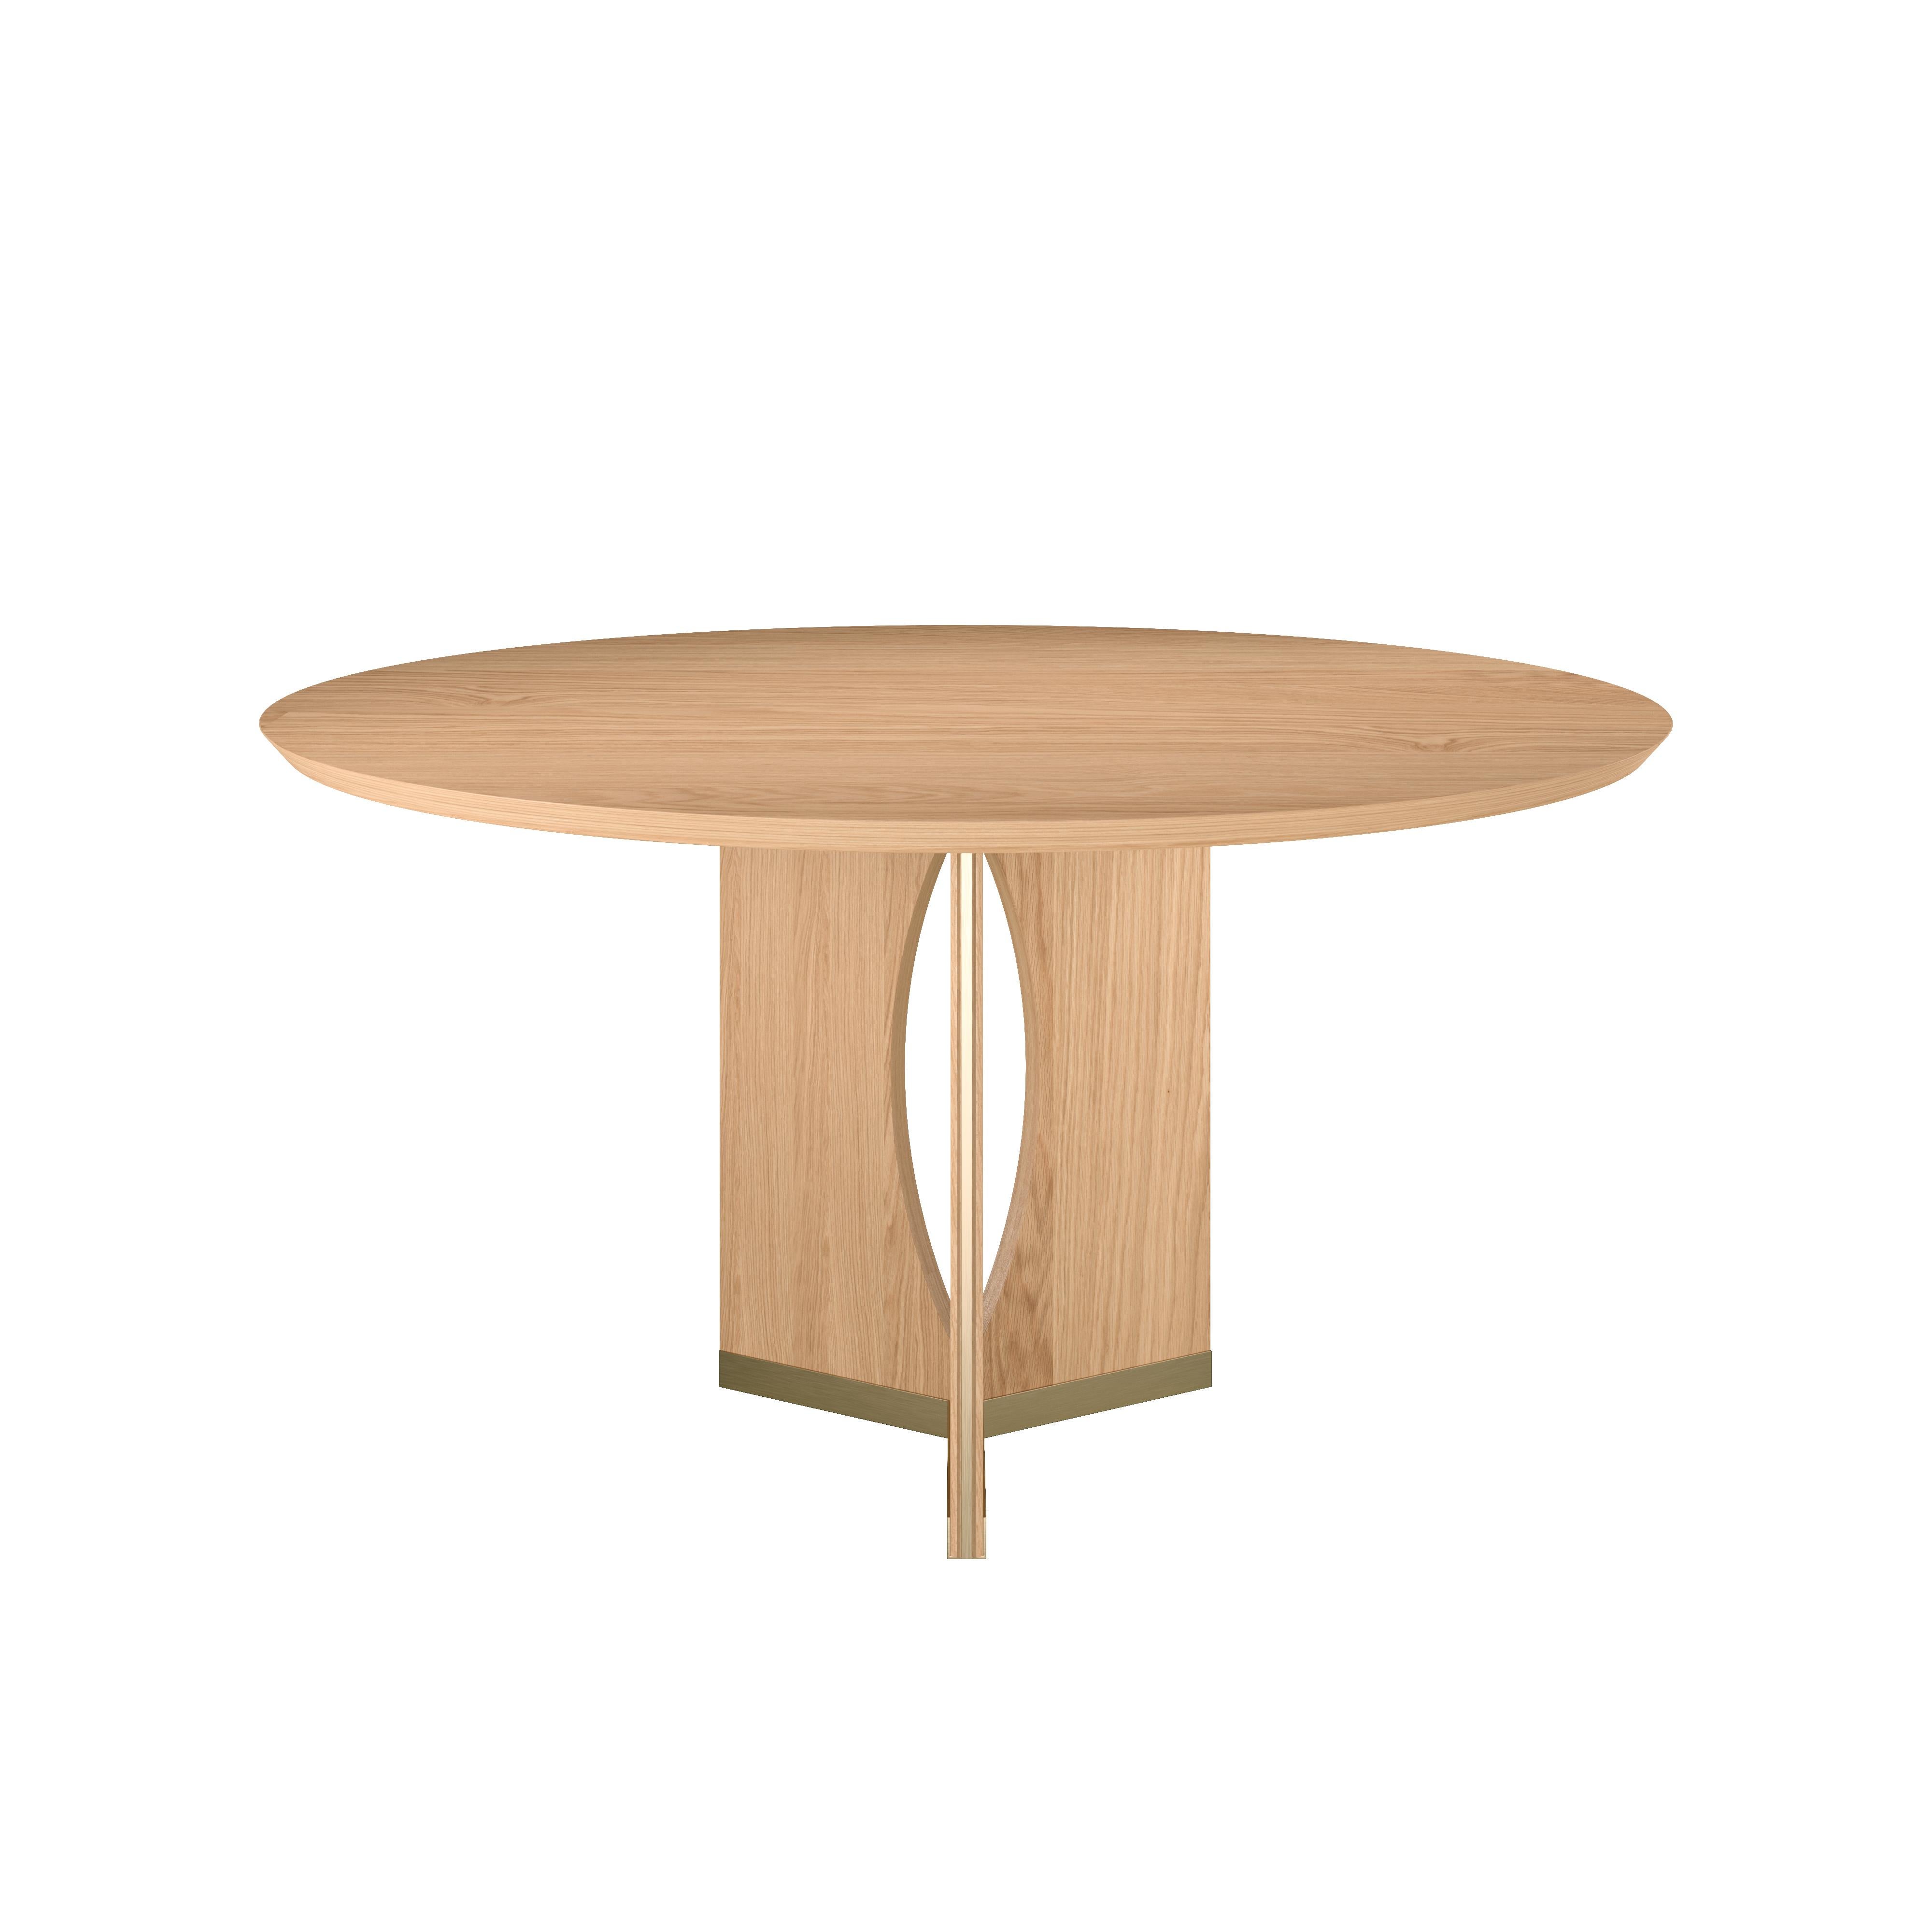 21st Century A Taylor Round Dining Table Walnut Wood Neuf - En vente à RIO TINTO, PT